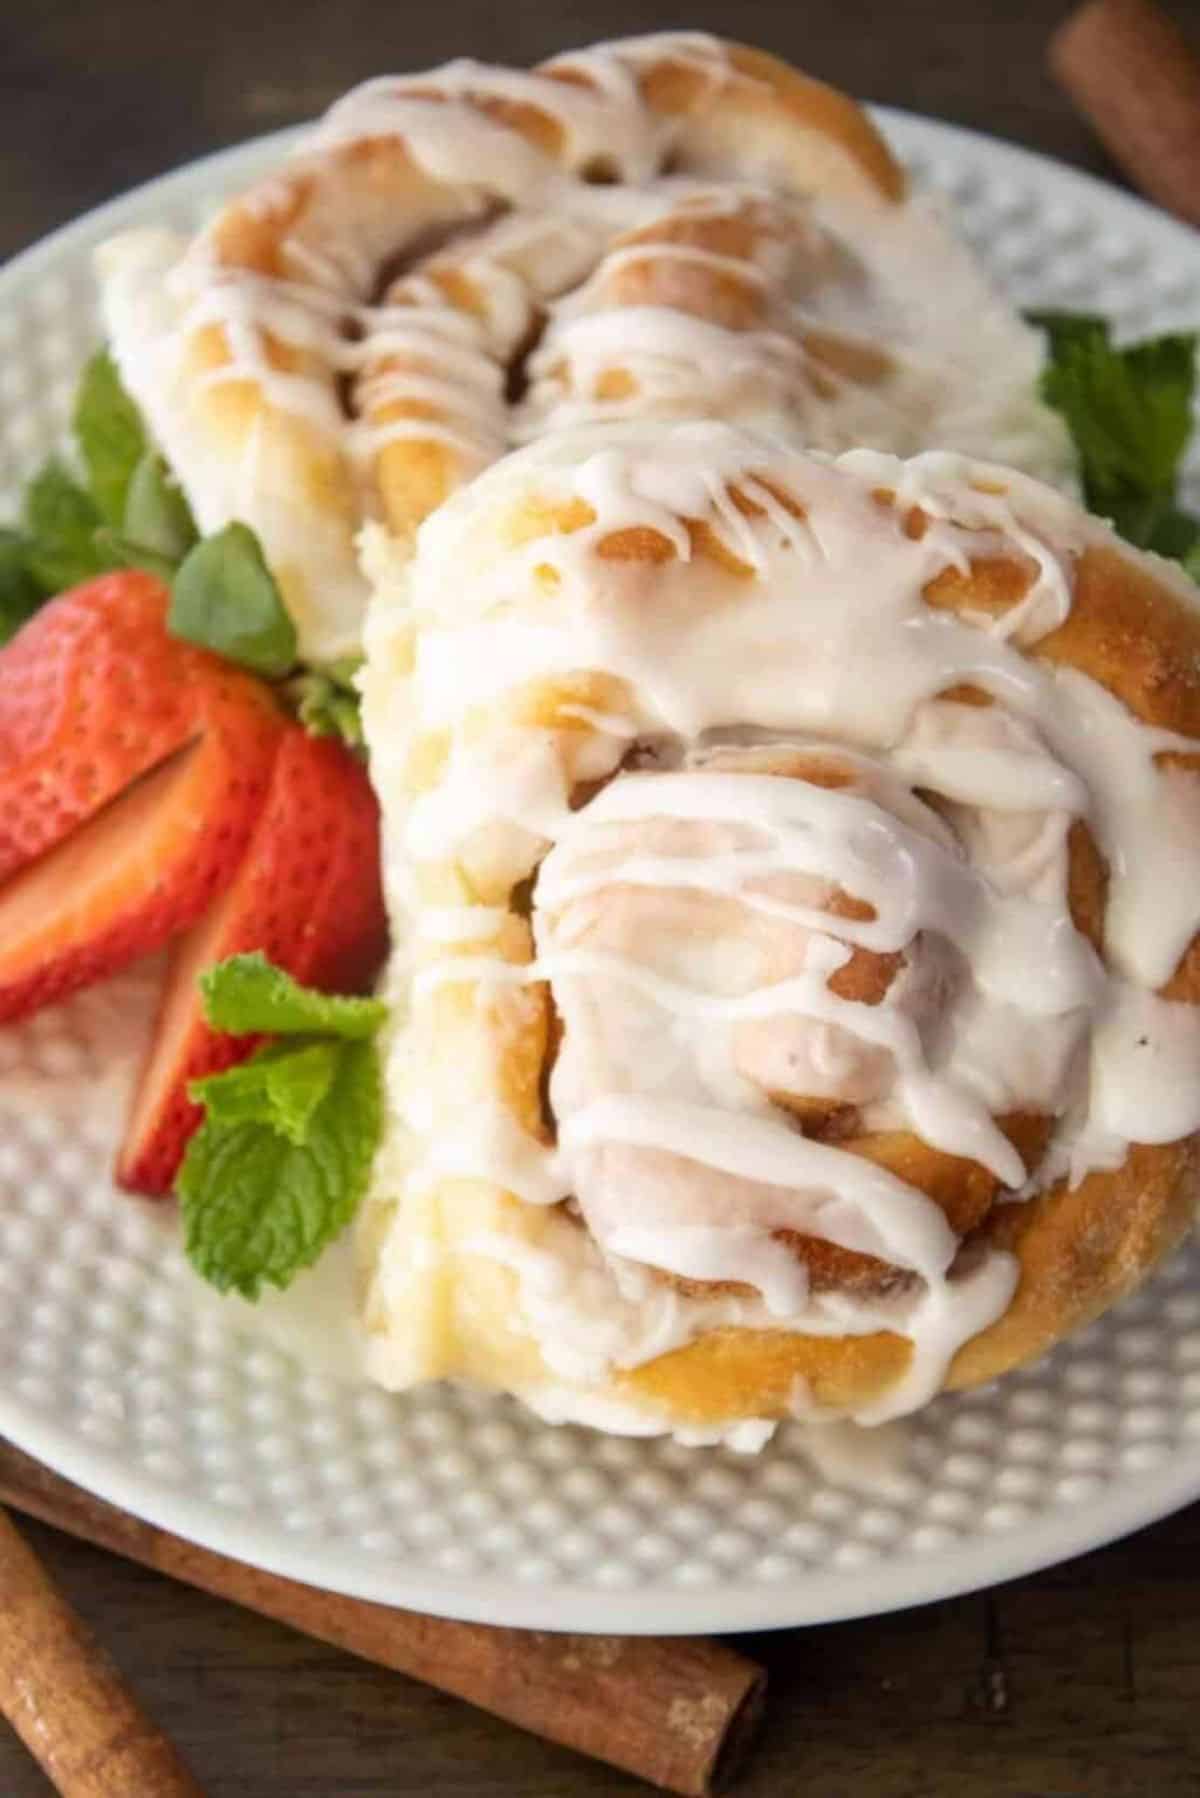 Cinnamon Rolls with a sliced strawberry on a white plate.